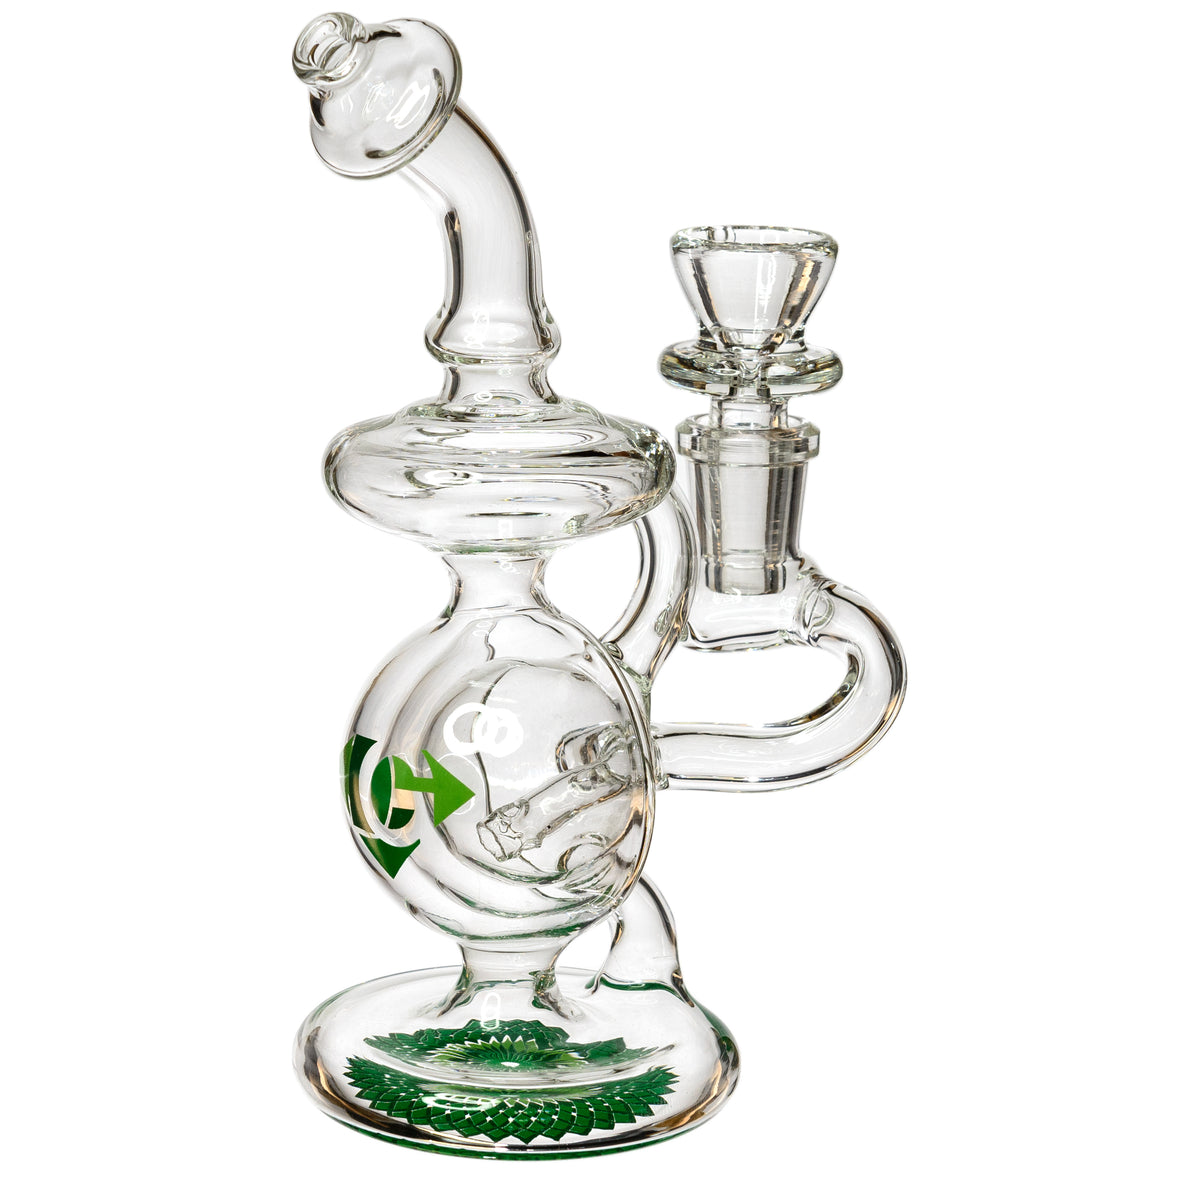 7" Orb Recycler Rig, by Diamond Glass (free banger included) - BKRY Inc.